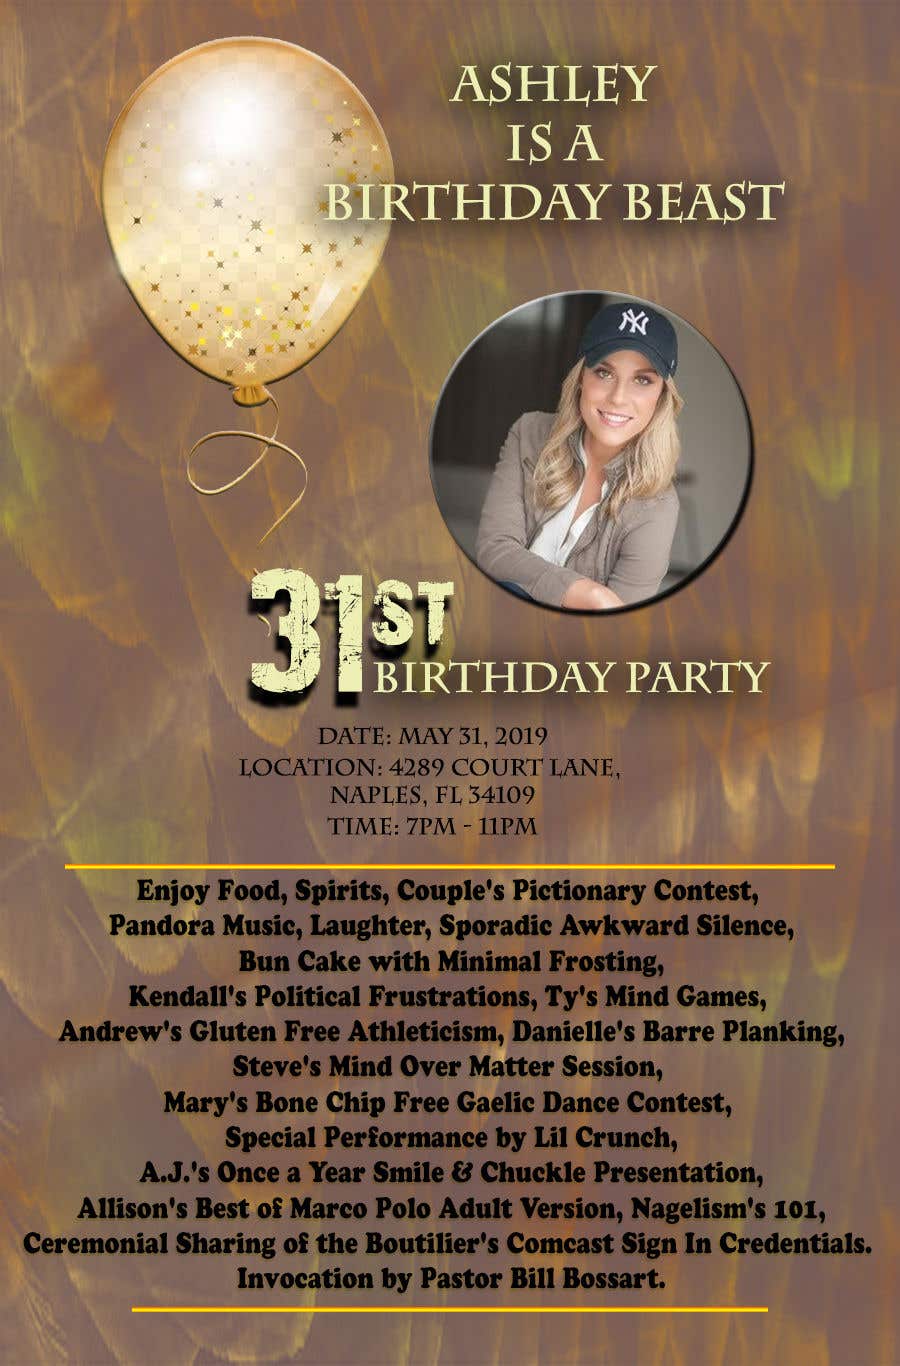 Konkurrenceindlæg #40 for                                                 Ashley is a Birthday Beast 31st Birthday Party Flyer
                                            